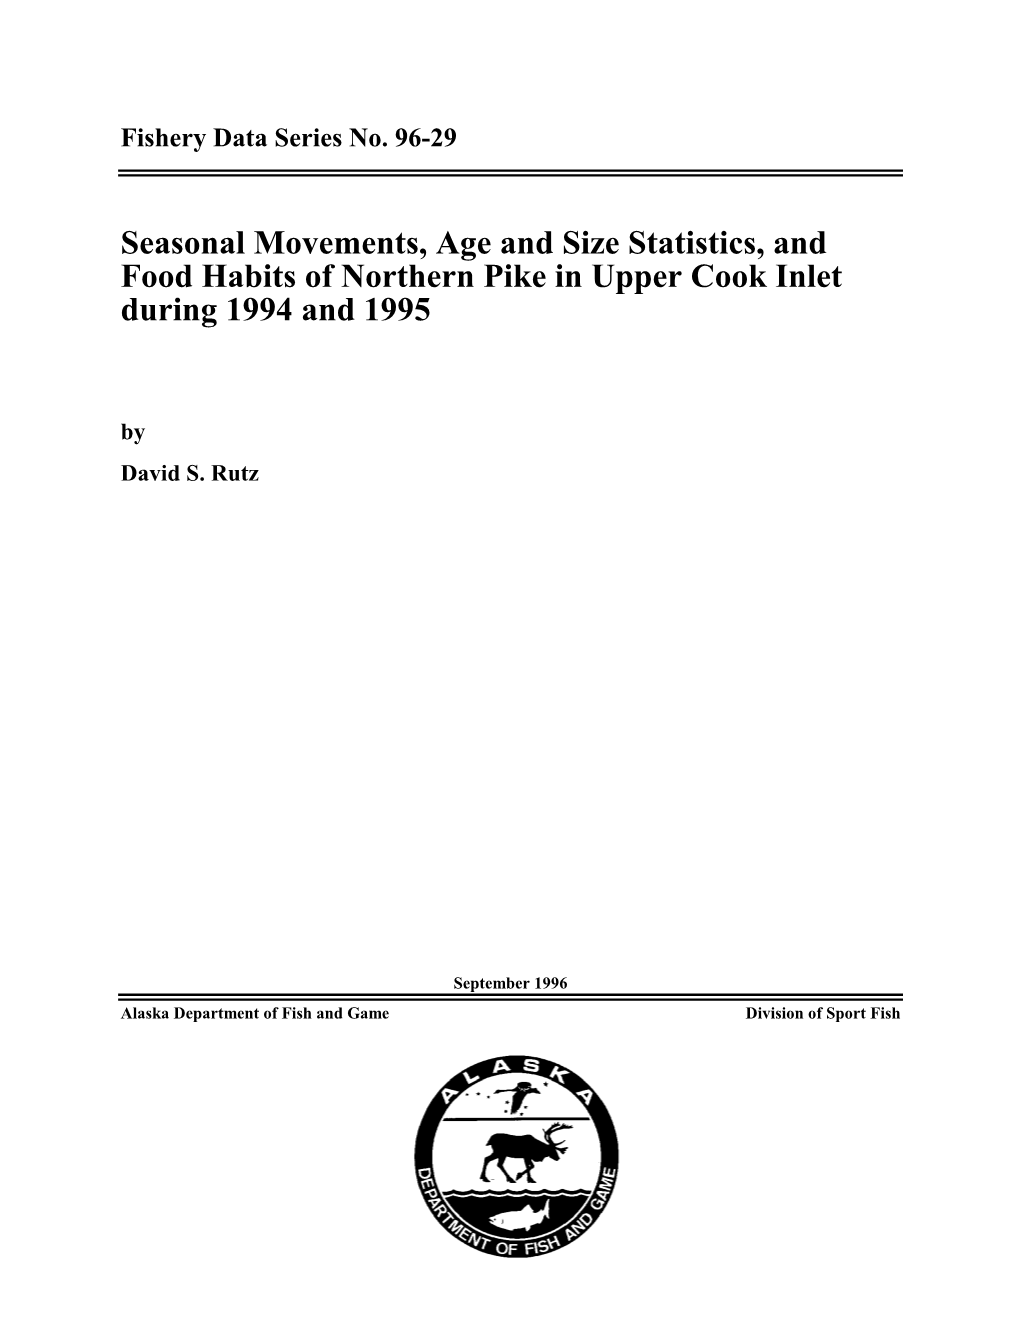 Seasonal Movements, Age and Size Statistics, and Food Habits of Northern Pike in Upper Cook Inlet During 1994 and 1995